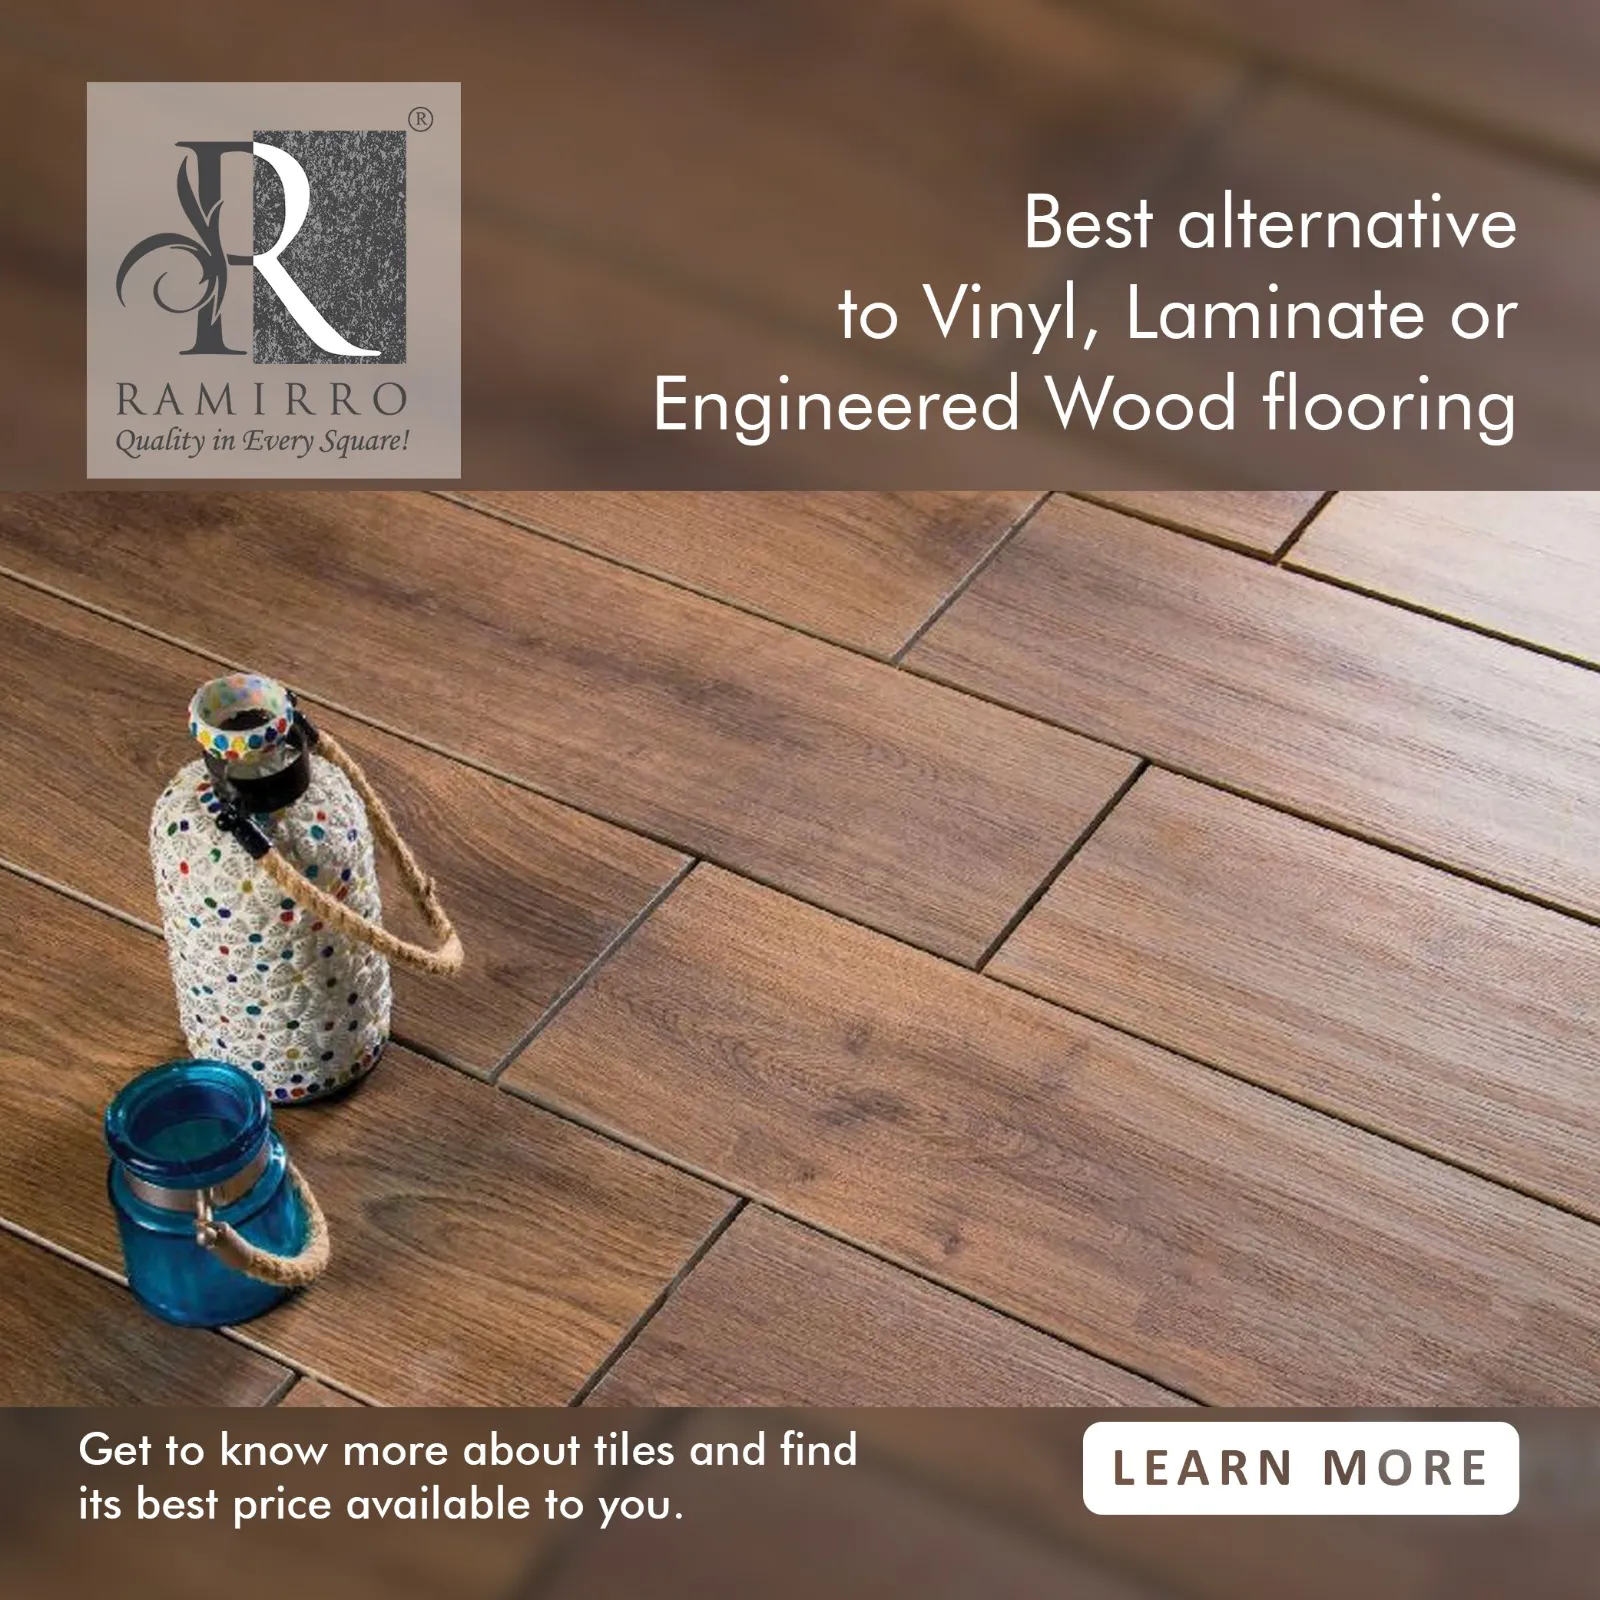 How To Fix And Replace Damaged Laminate, Vinyl Plank (LVP) Engineered Wood  Flooring Like A Pro! DIY 